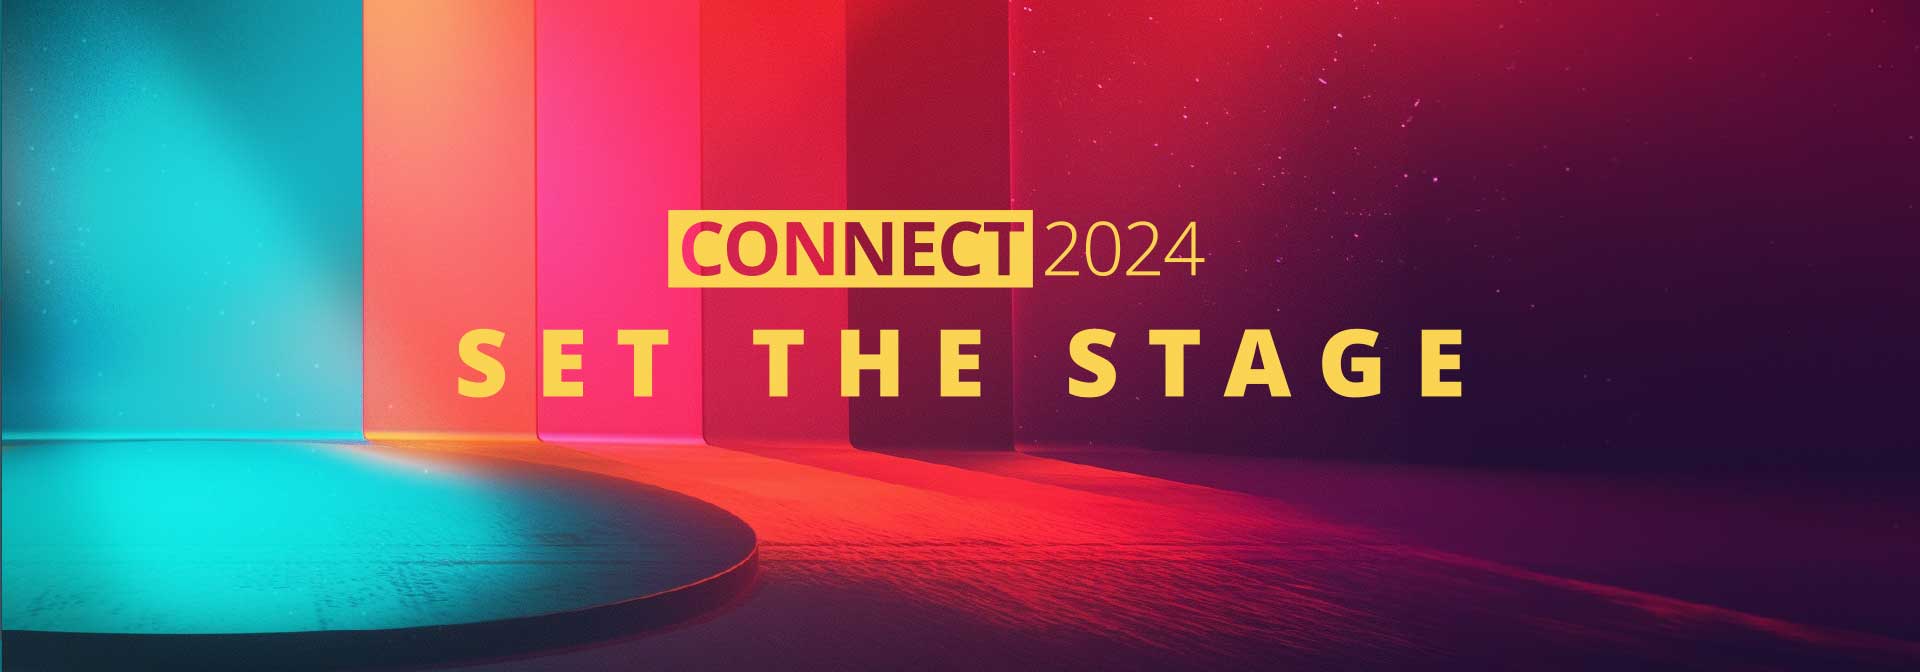 Stibo Systems Connect 2024